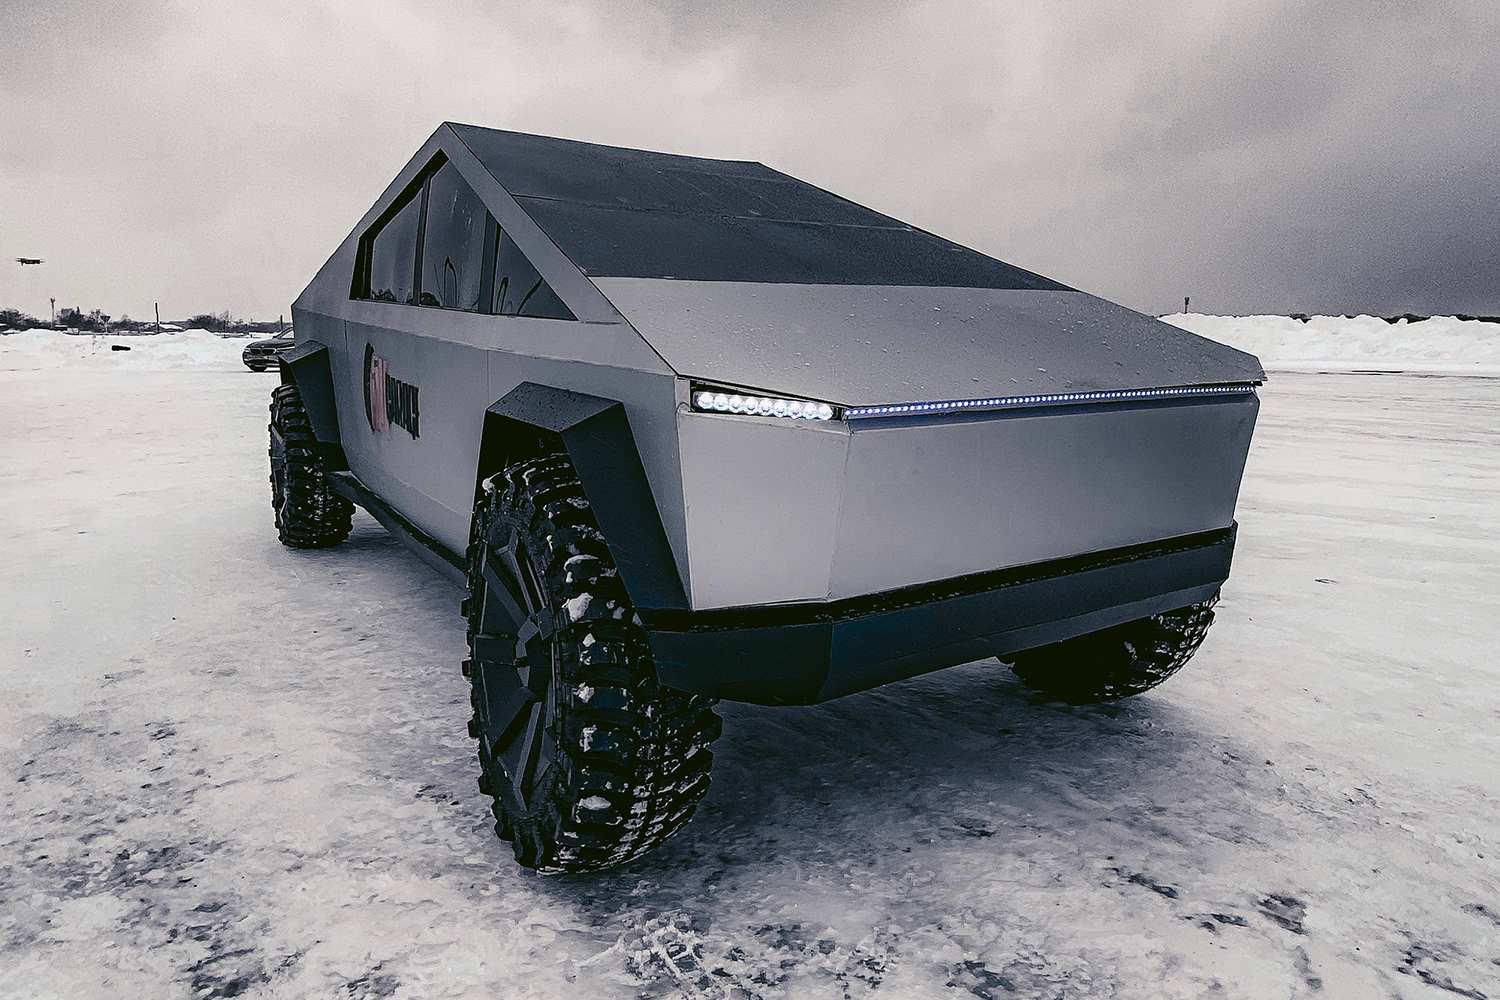 The Tesla Cybertruck replica from Russian YouTube group Garage 54 sitting out in the snow in Siberia. We spoke with YouTube host Vlad Barashenkov about how it came together.